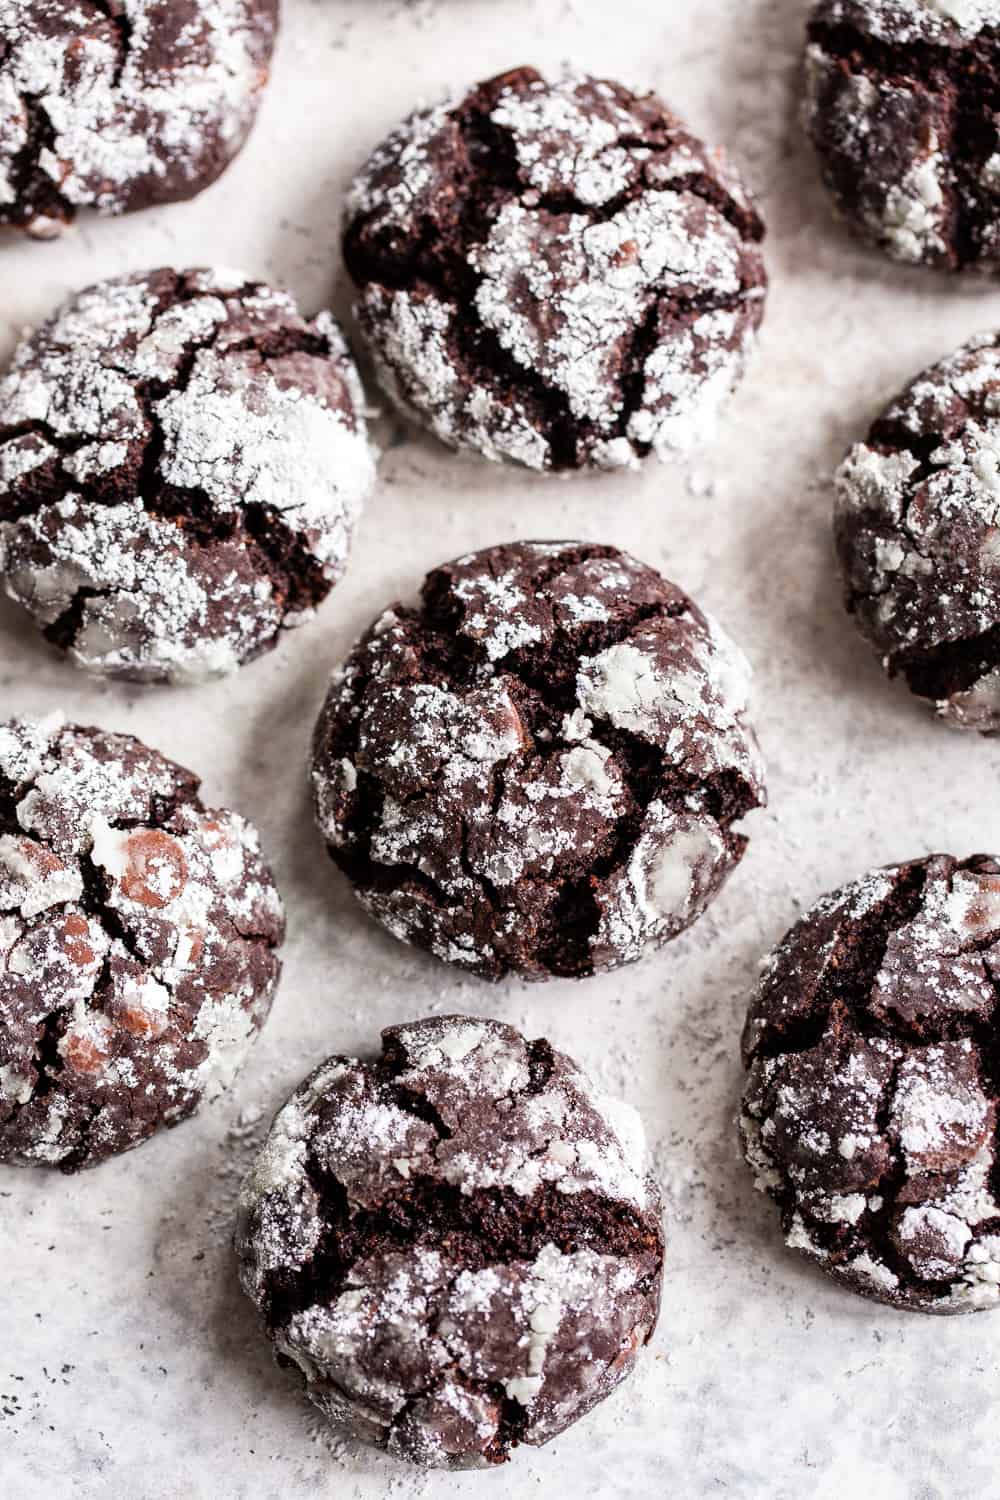 These easy paleo chocolate crinkle cookies are sure to become a holiday baking favorite! They have double the chocolate and a chewy brownie-like inside. Gluten free, grain free and dairy free. #paleo #glutenfree #cleaneating #christmascookies #christmas #paleobaking